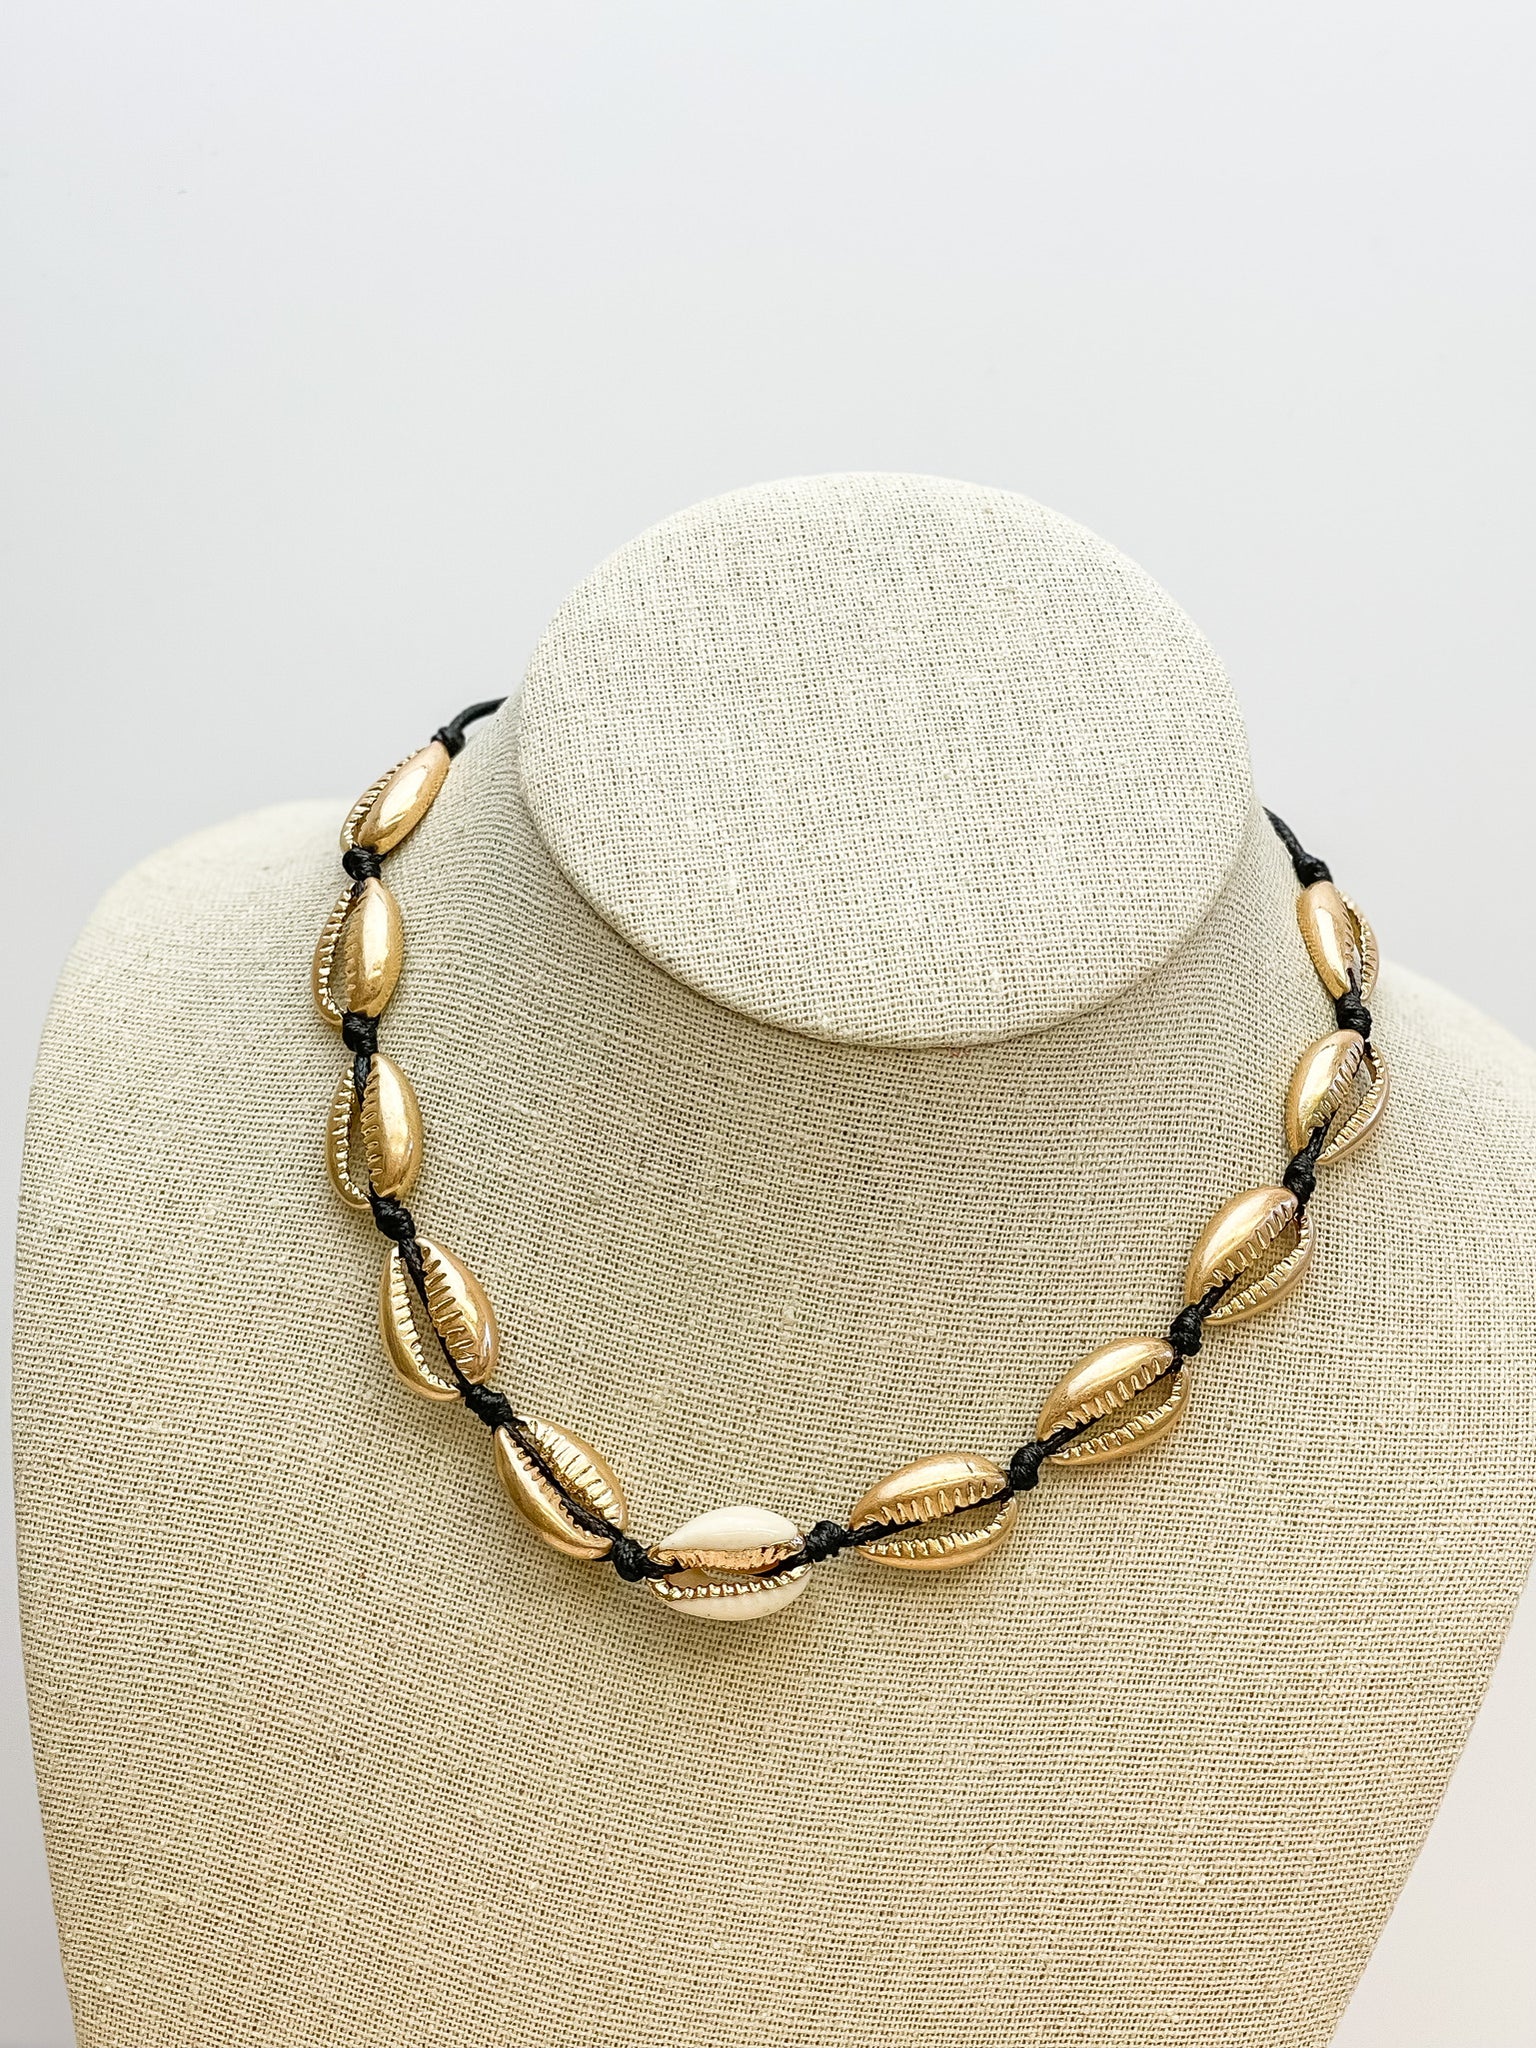 Gold Puka Shell Necklaces